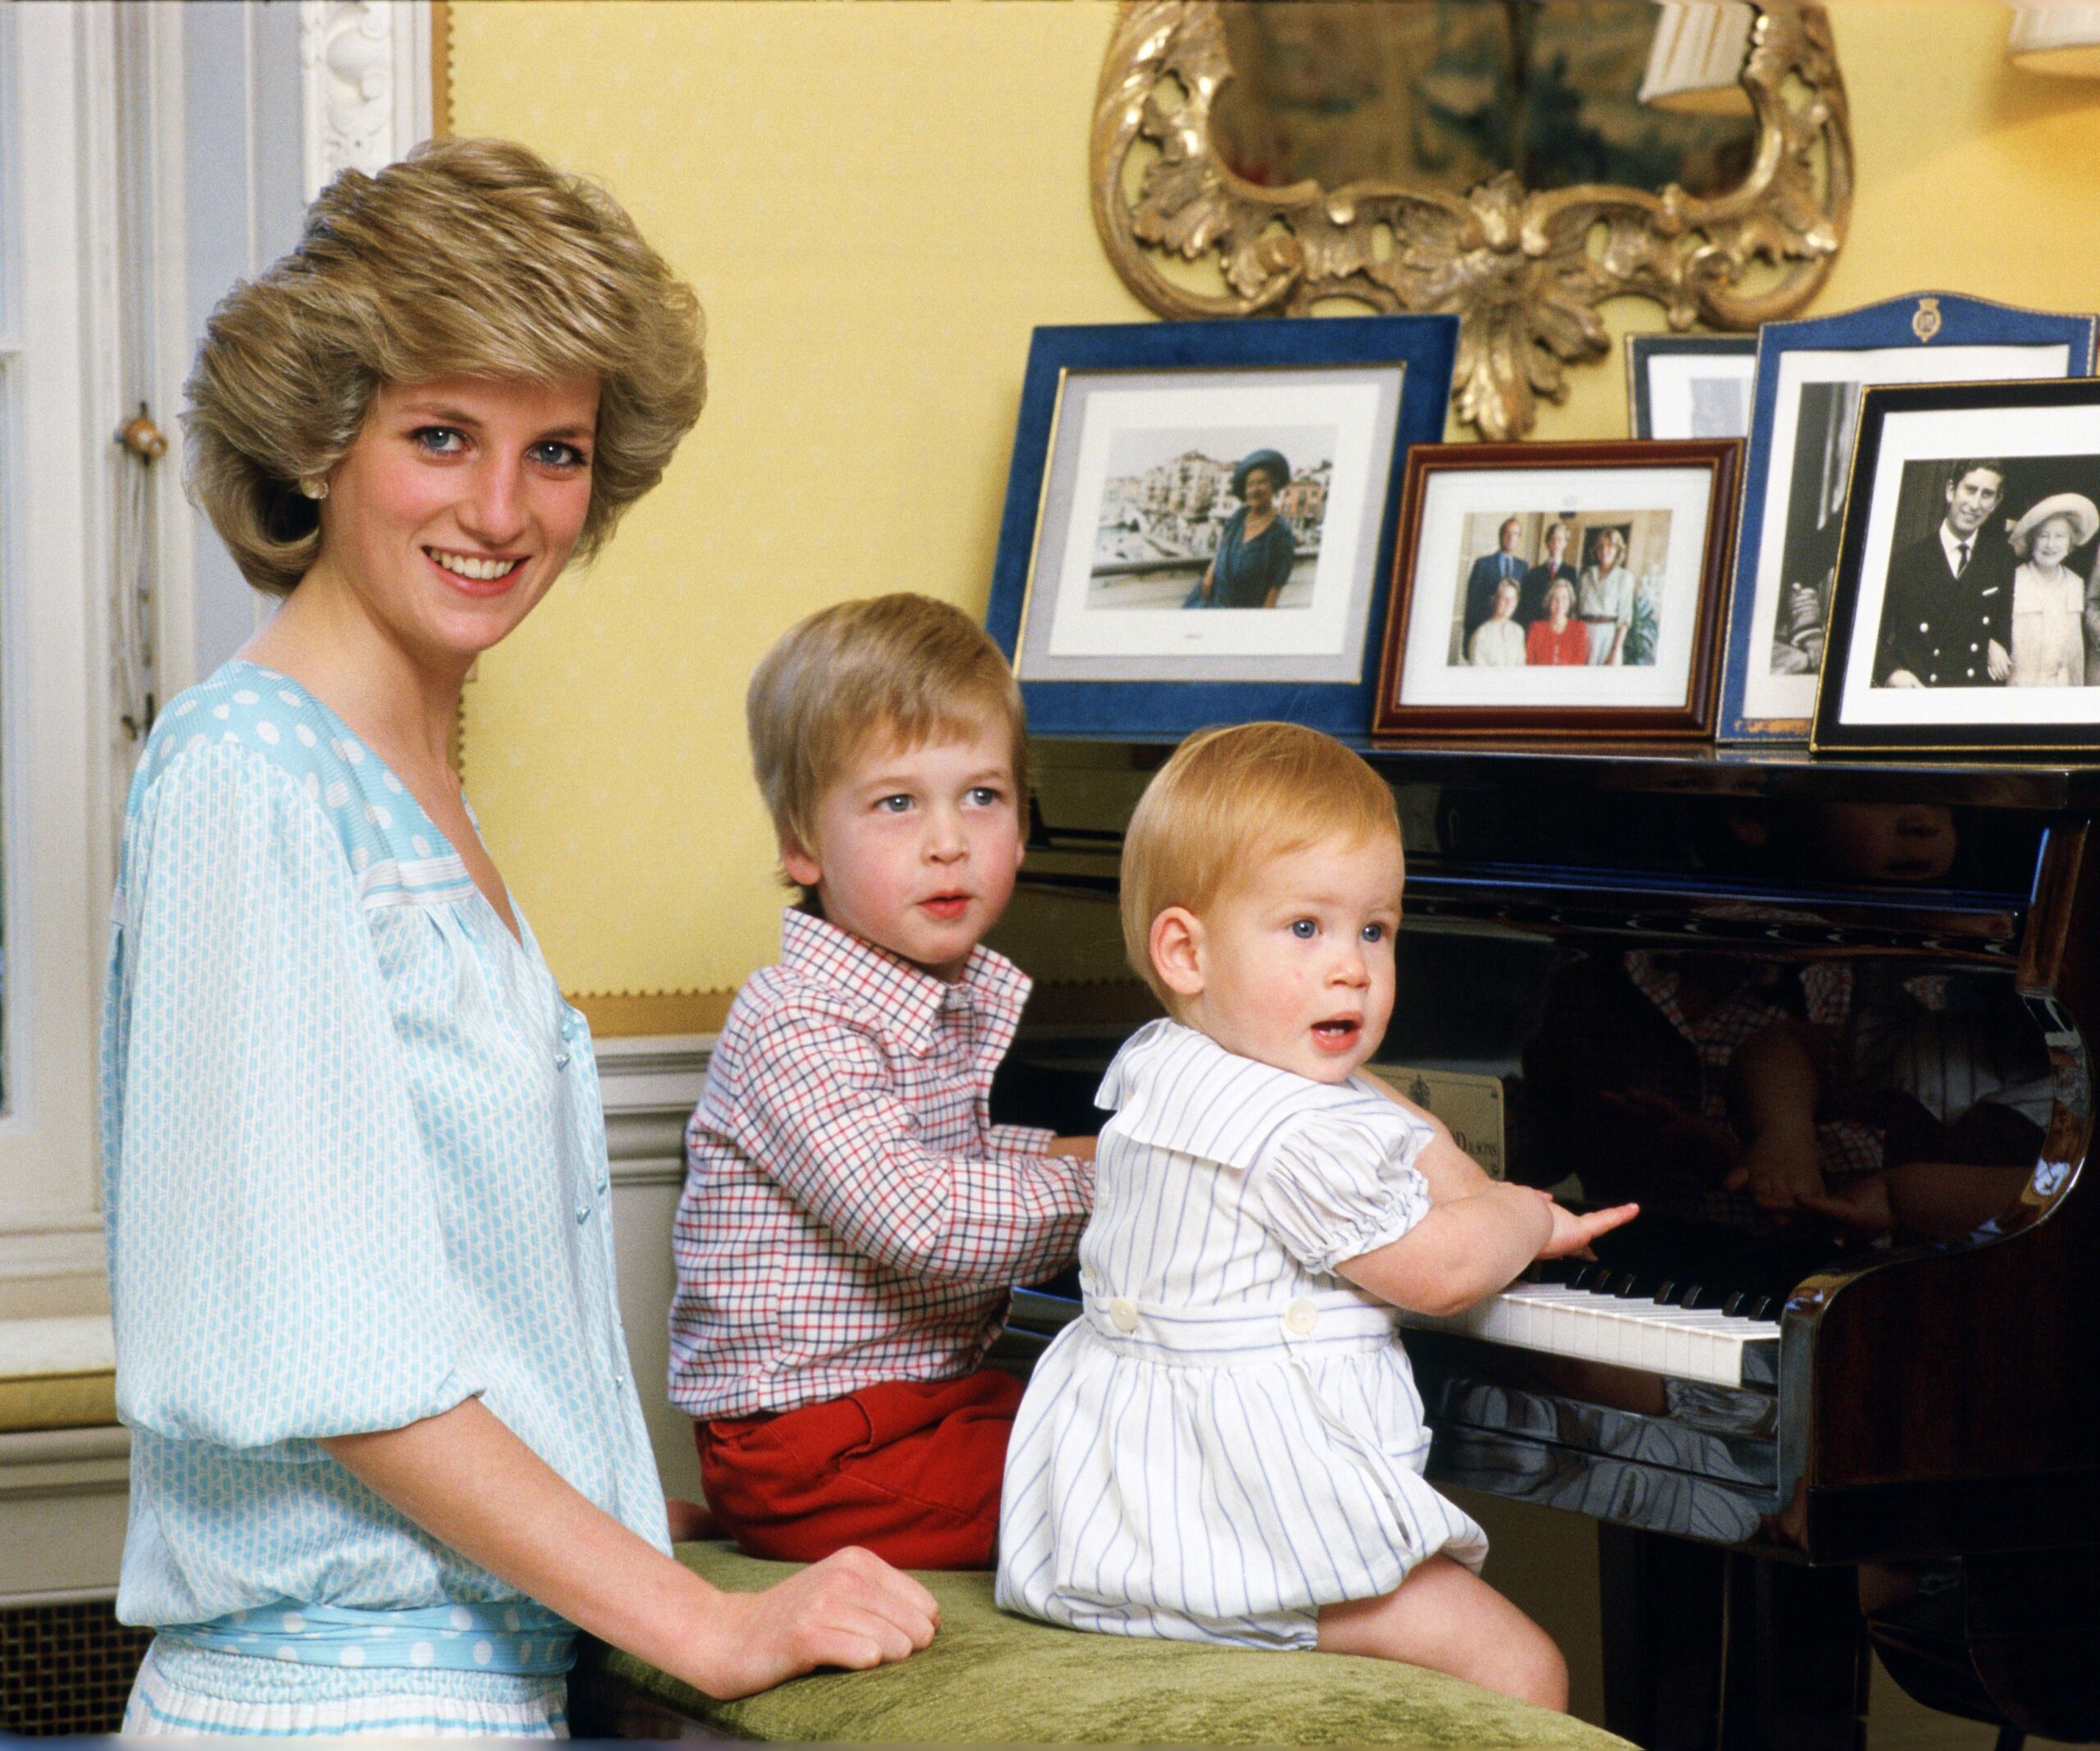 Old video footage of William, Harry and Diana resurfaces